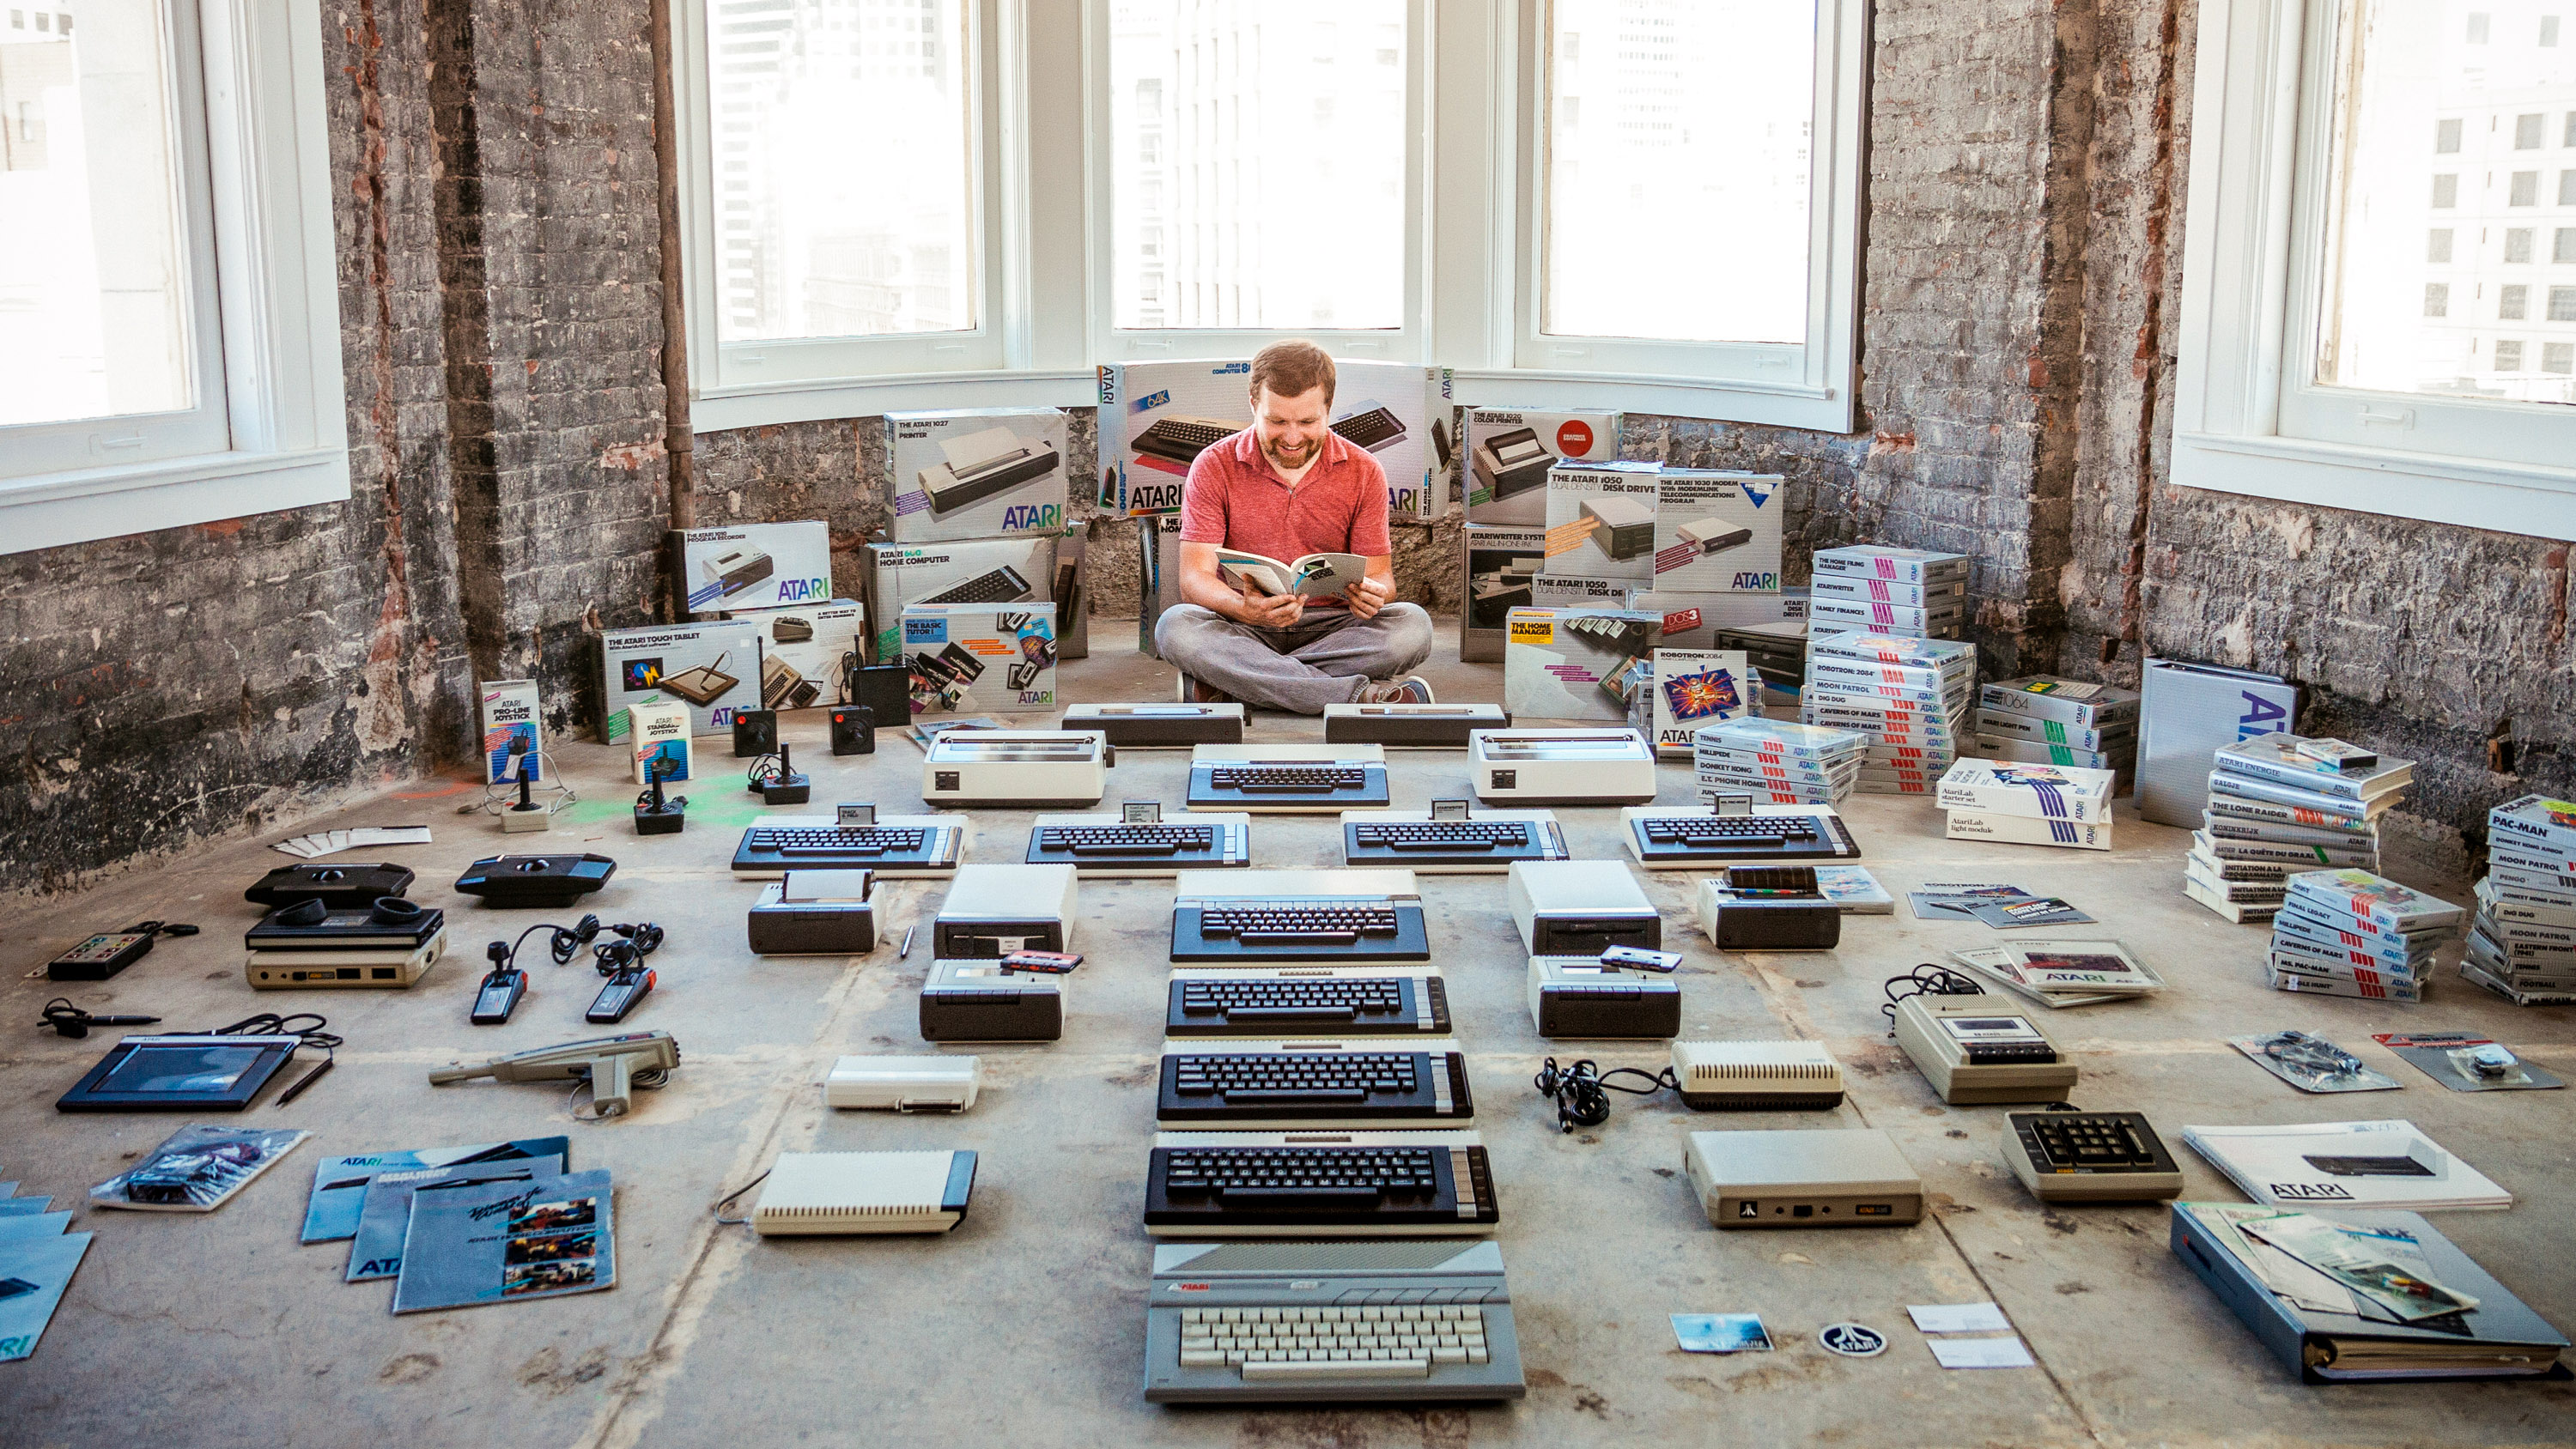 Marcin Wichary sitting on the floor surrounded by his collection of keyboards.